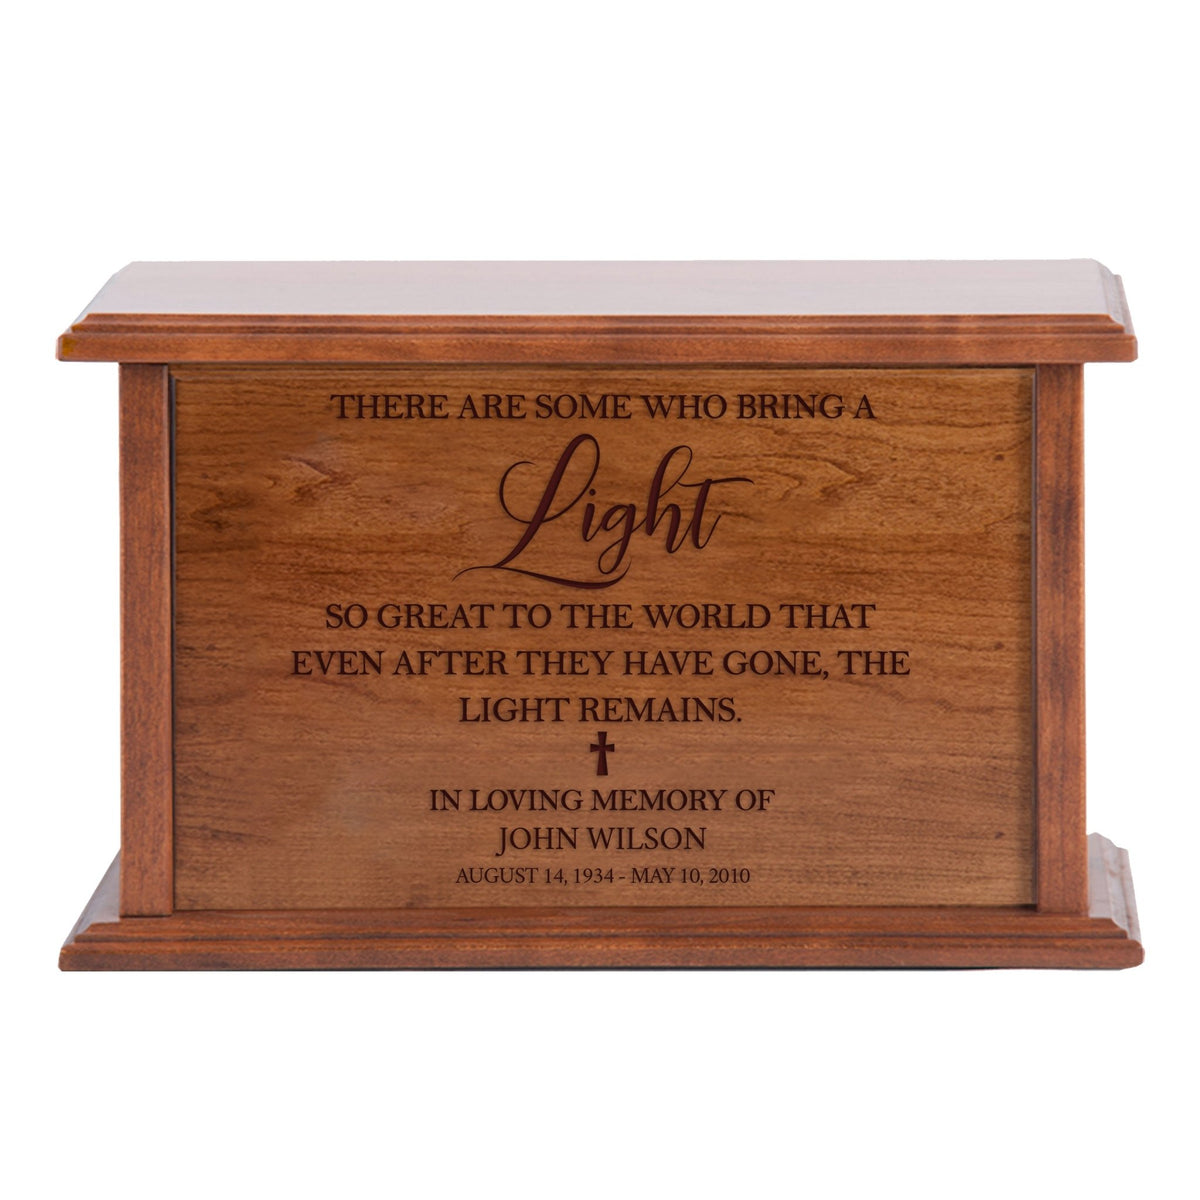 Custom Engraved Wooden Memorial Urns for Human Adult Ashes - There Are Some Who Bring